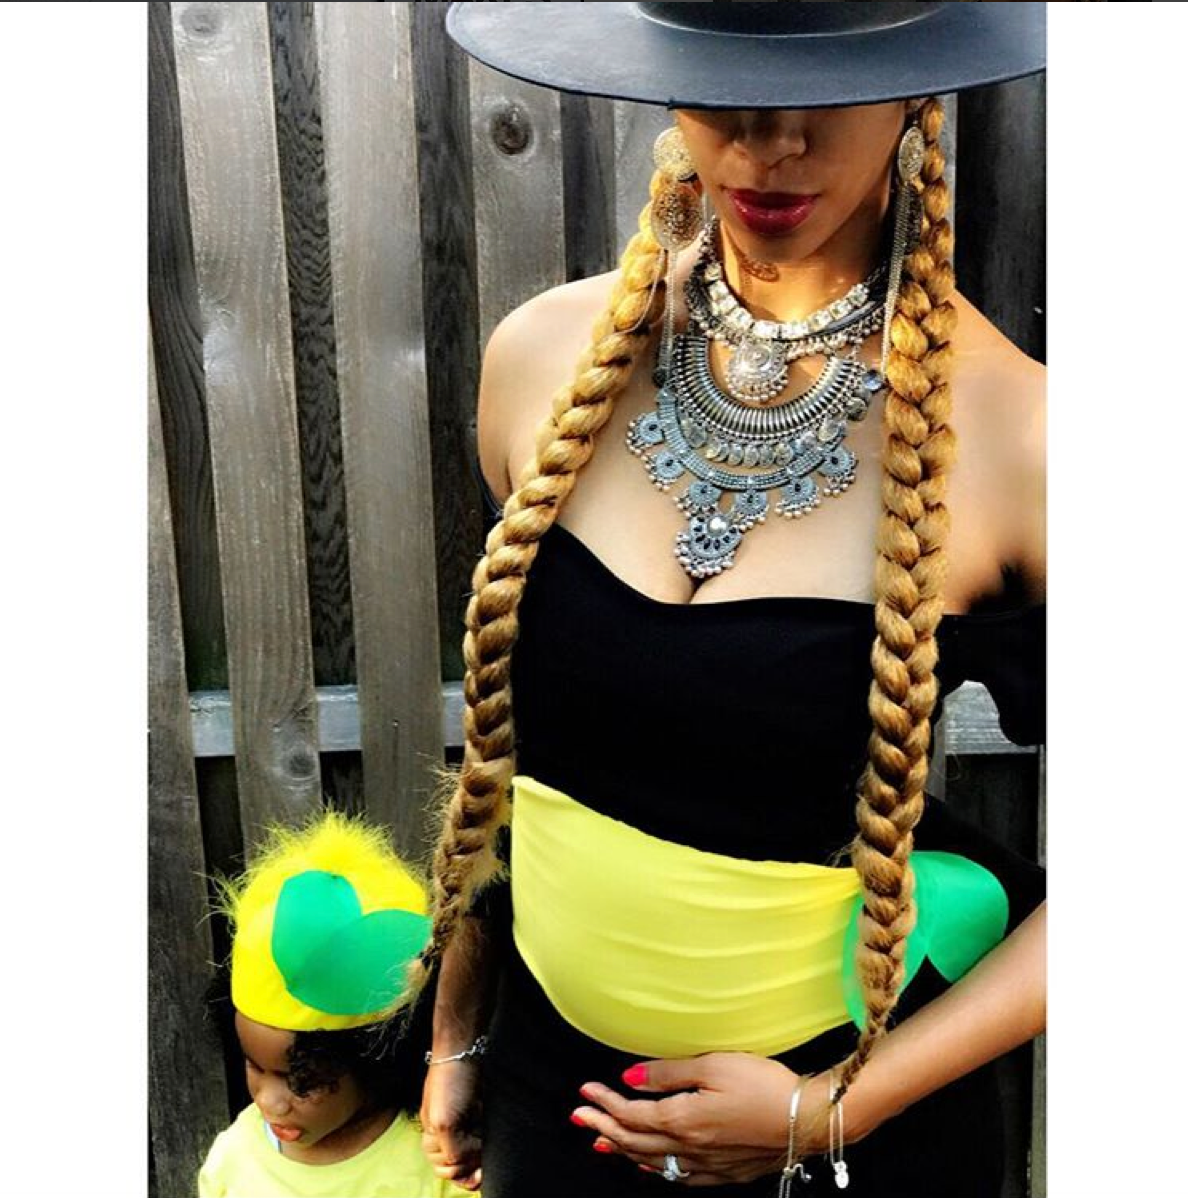 12 Costumes That Prove This Halloween Was All About Beyonce's Lemonade
